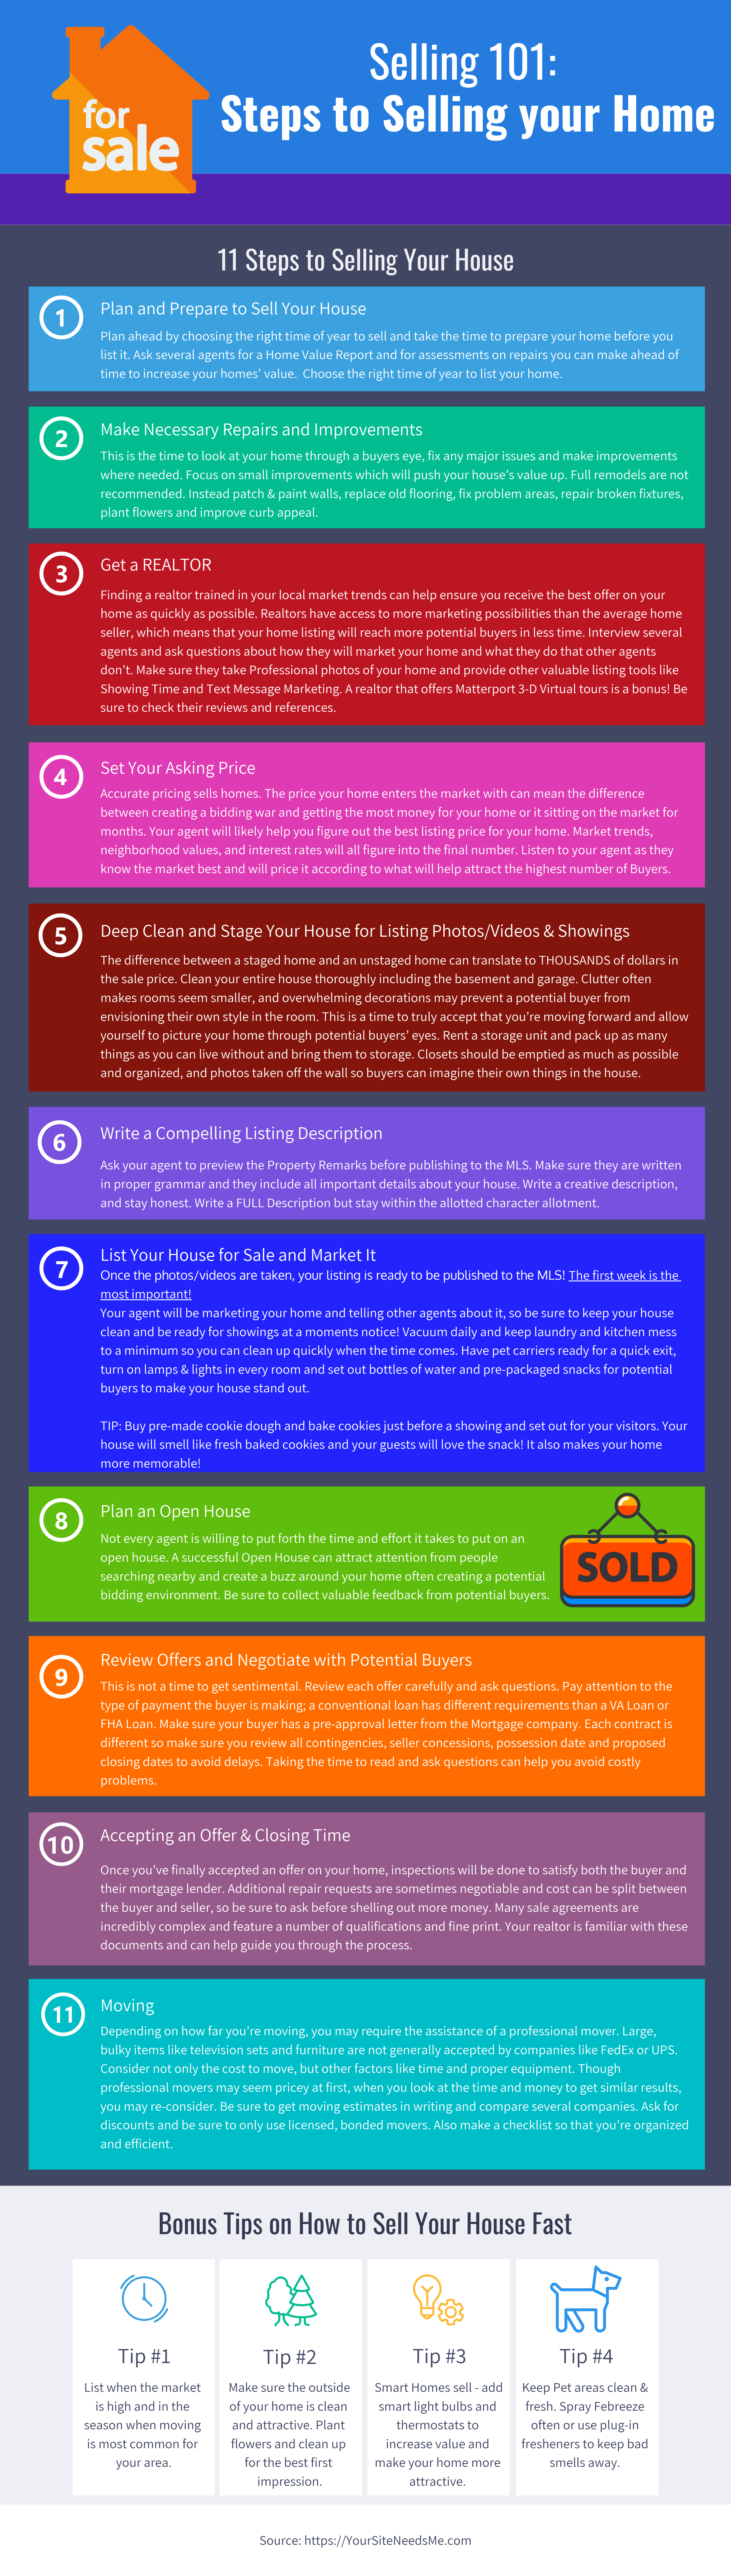 11 Steps t o Selling your Home Infographic